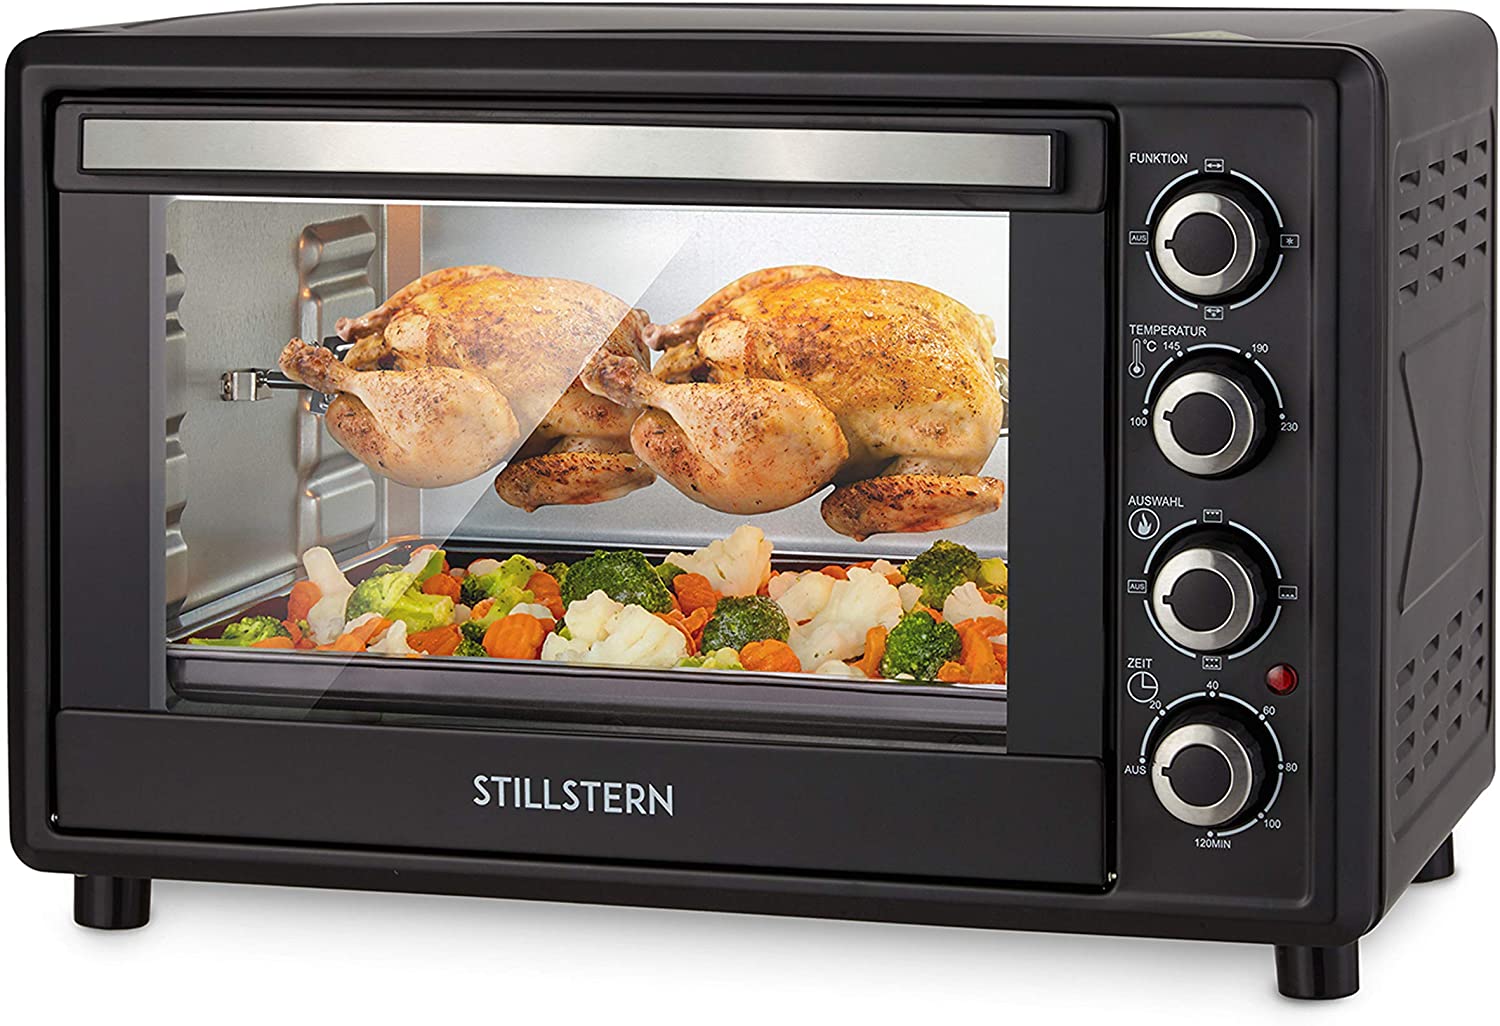 Stillstern Mini Oven With Convection Air (35 Litres) – 2 X Baking Trays German Labelled Controls Oven Gloves Recipe Book Double Glass Door 1600 W Rotisserie Crumb Tray Timer Interior Lighting